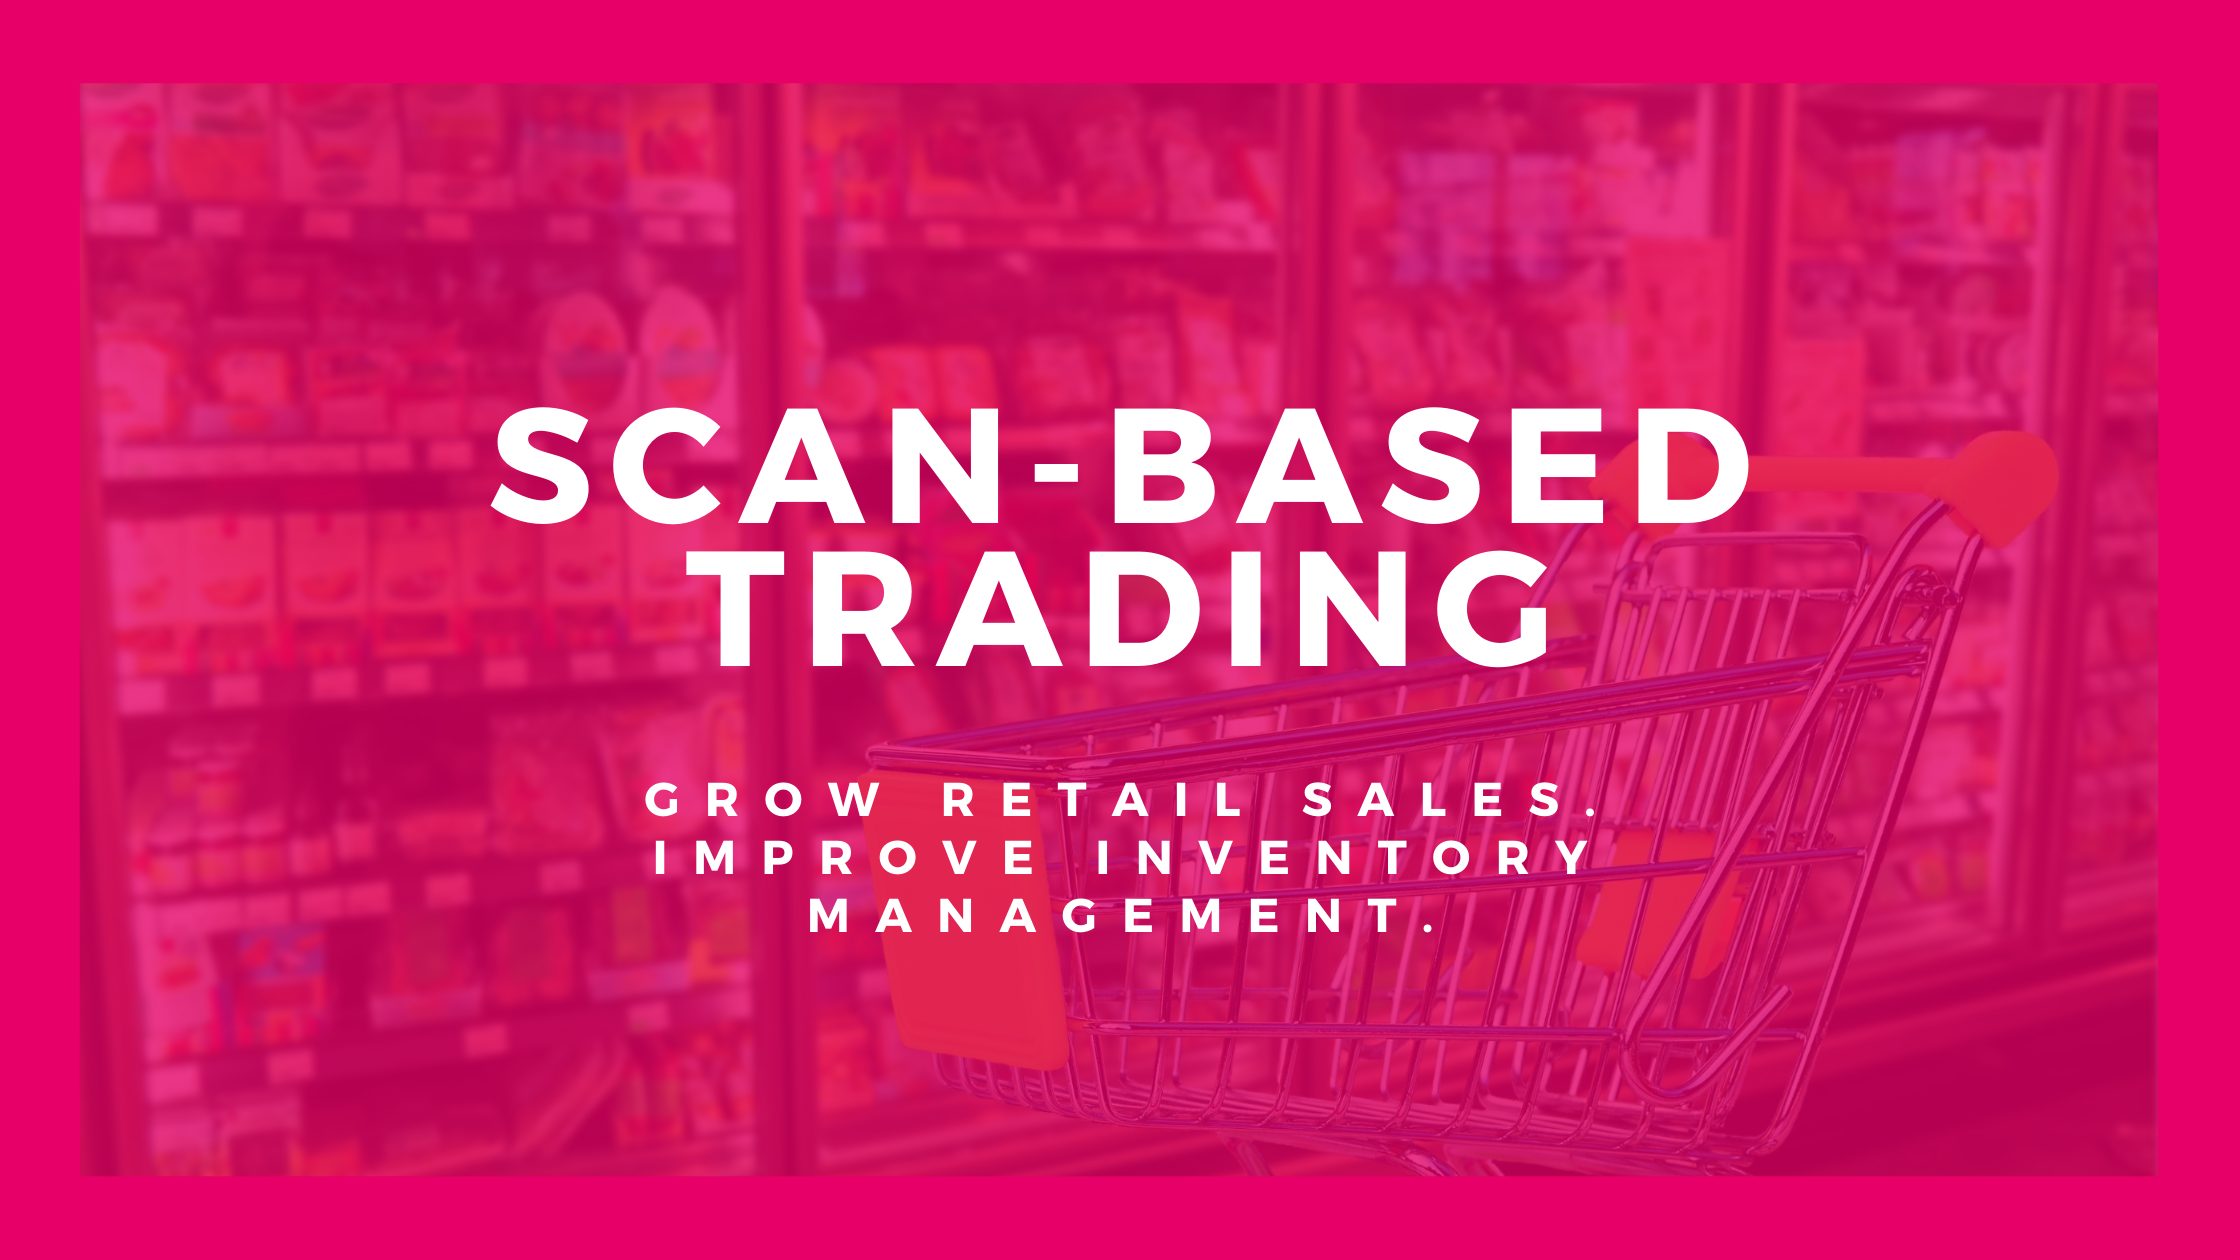 Scan-Based Trading